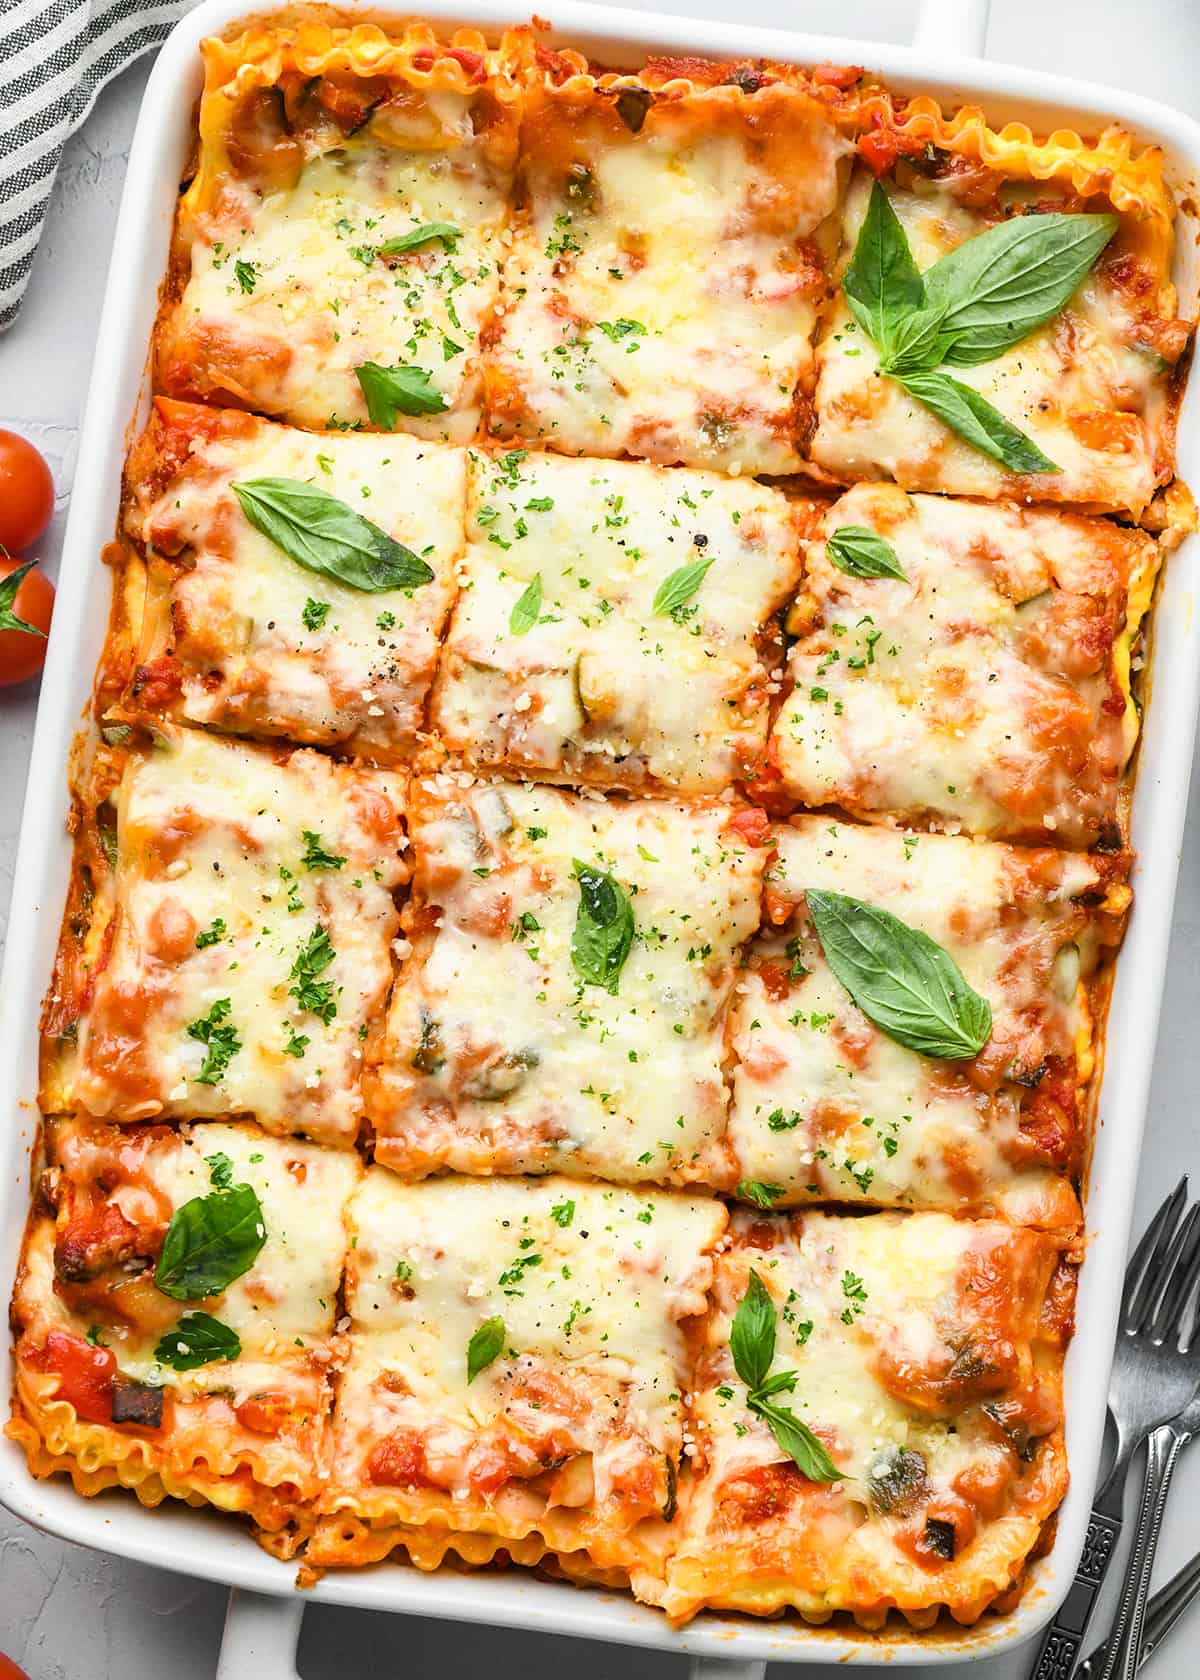 Vegetable Lasagna in a baking dish cut into 12 pieces